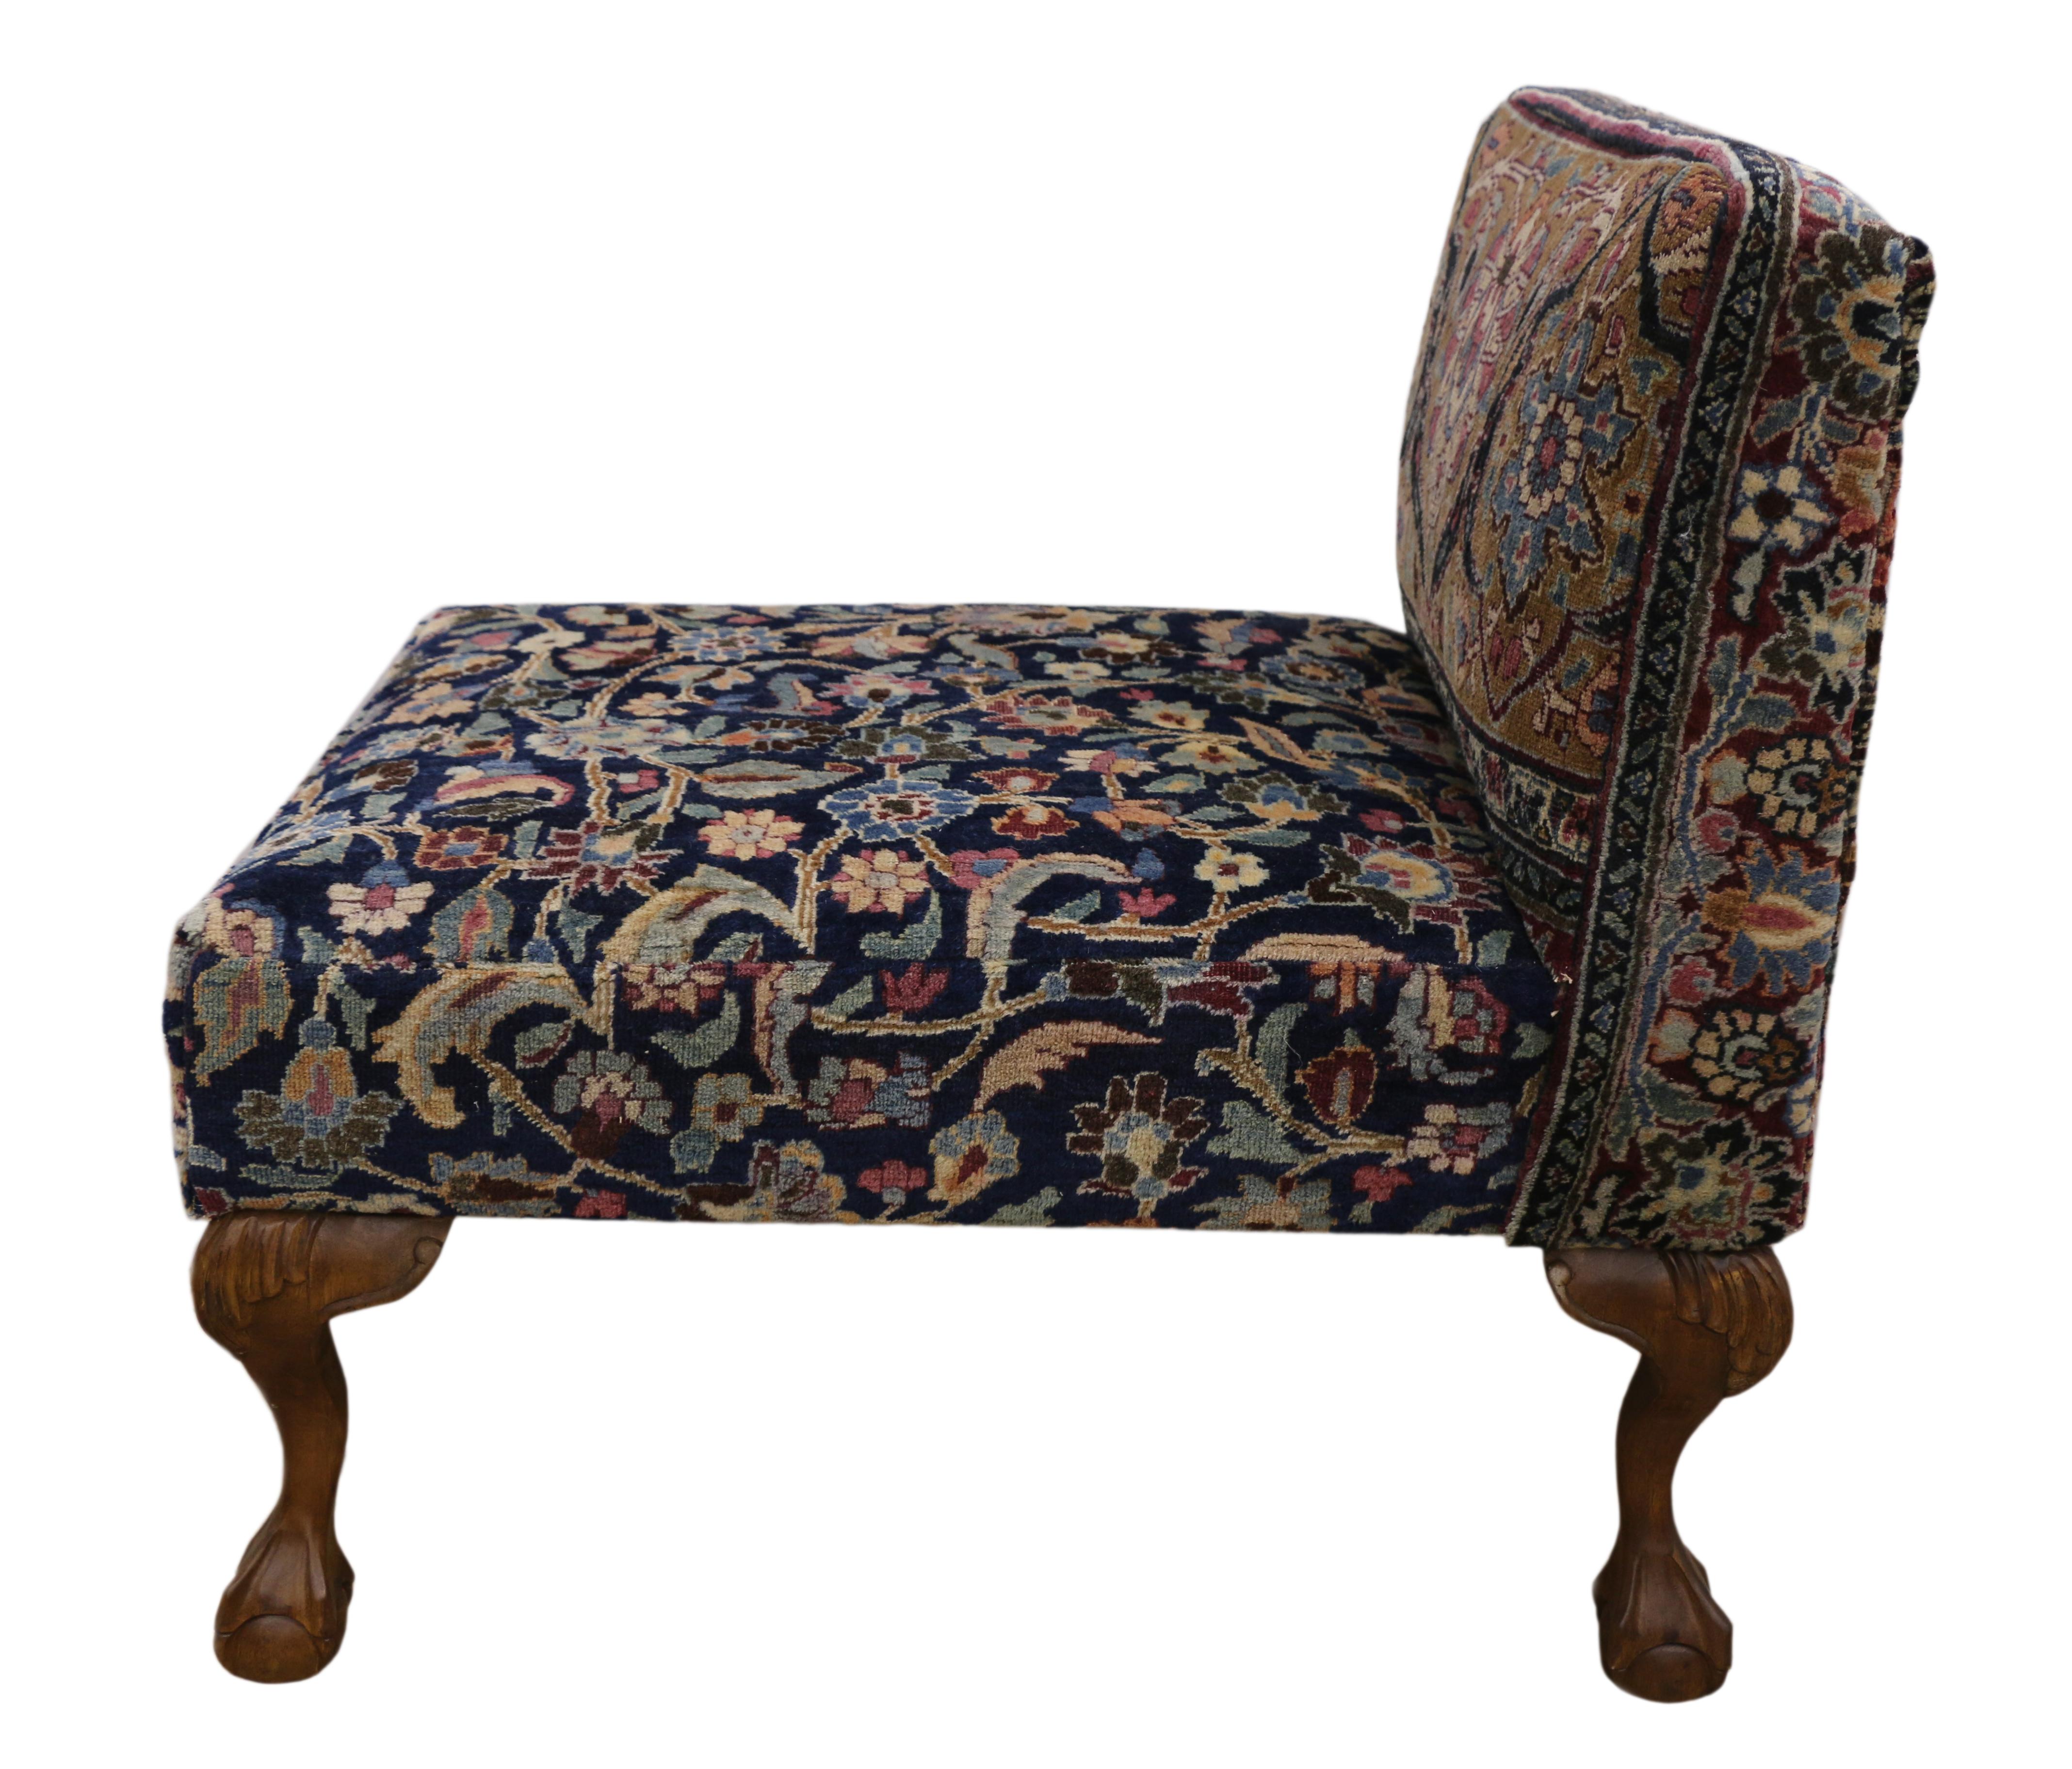 200002 Slipper chair with claw feet from antique Persian Khorassan rug. This hand knotted wool late 19th century antique Persian Khorassan rug was converted into slipper chair. It is a handcrafted and one-of-a-kind slipper chair with wooden claw